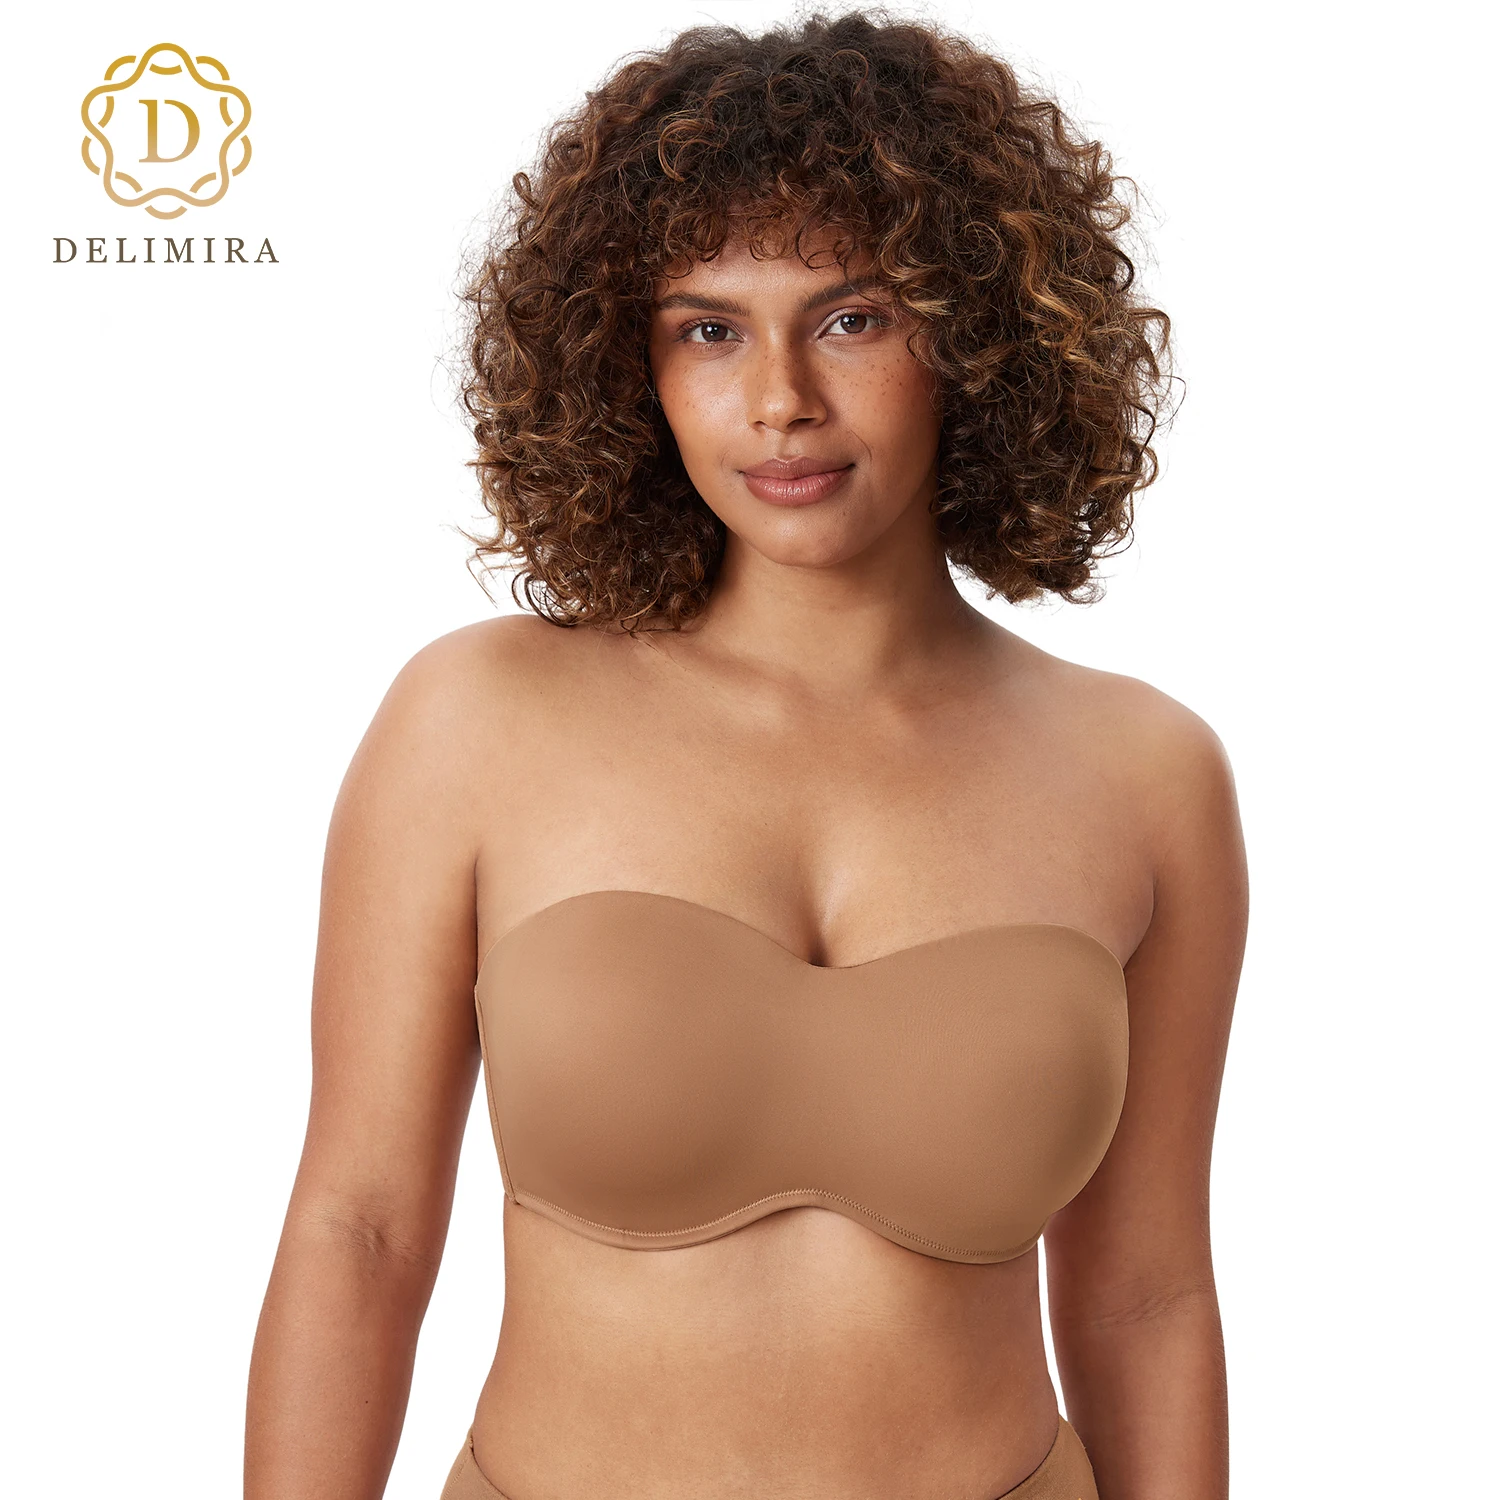 

Delimira Women's Plus Size Strapless Bra Seamless Bandeau Full Coverage Smooth Invisible Underwire Minimizer Bras for Big Bust